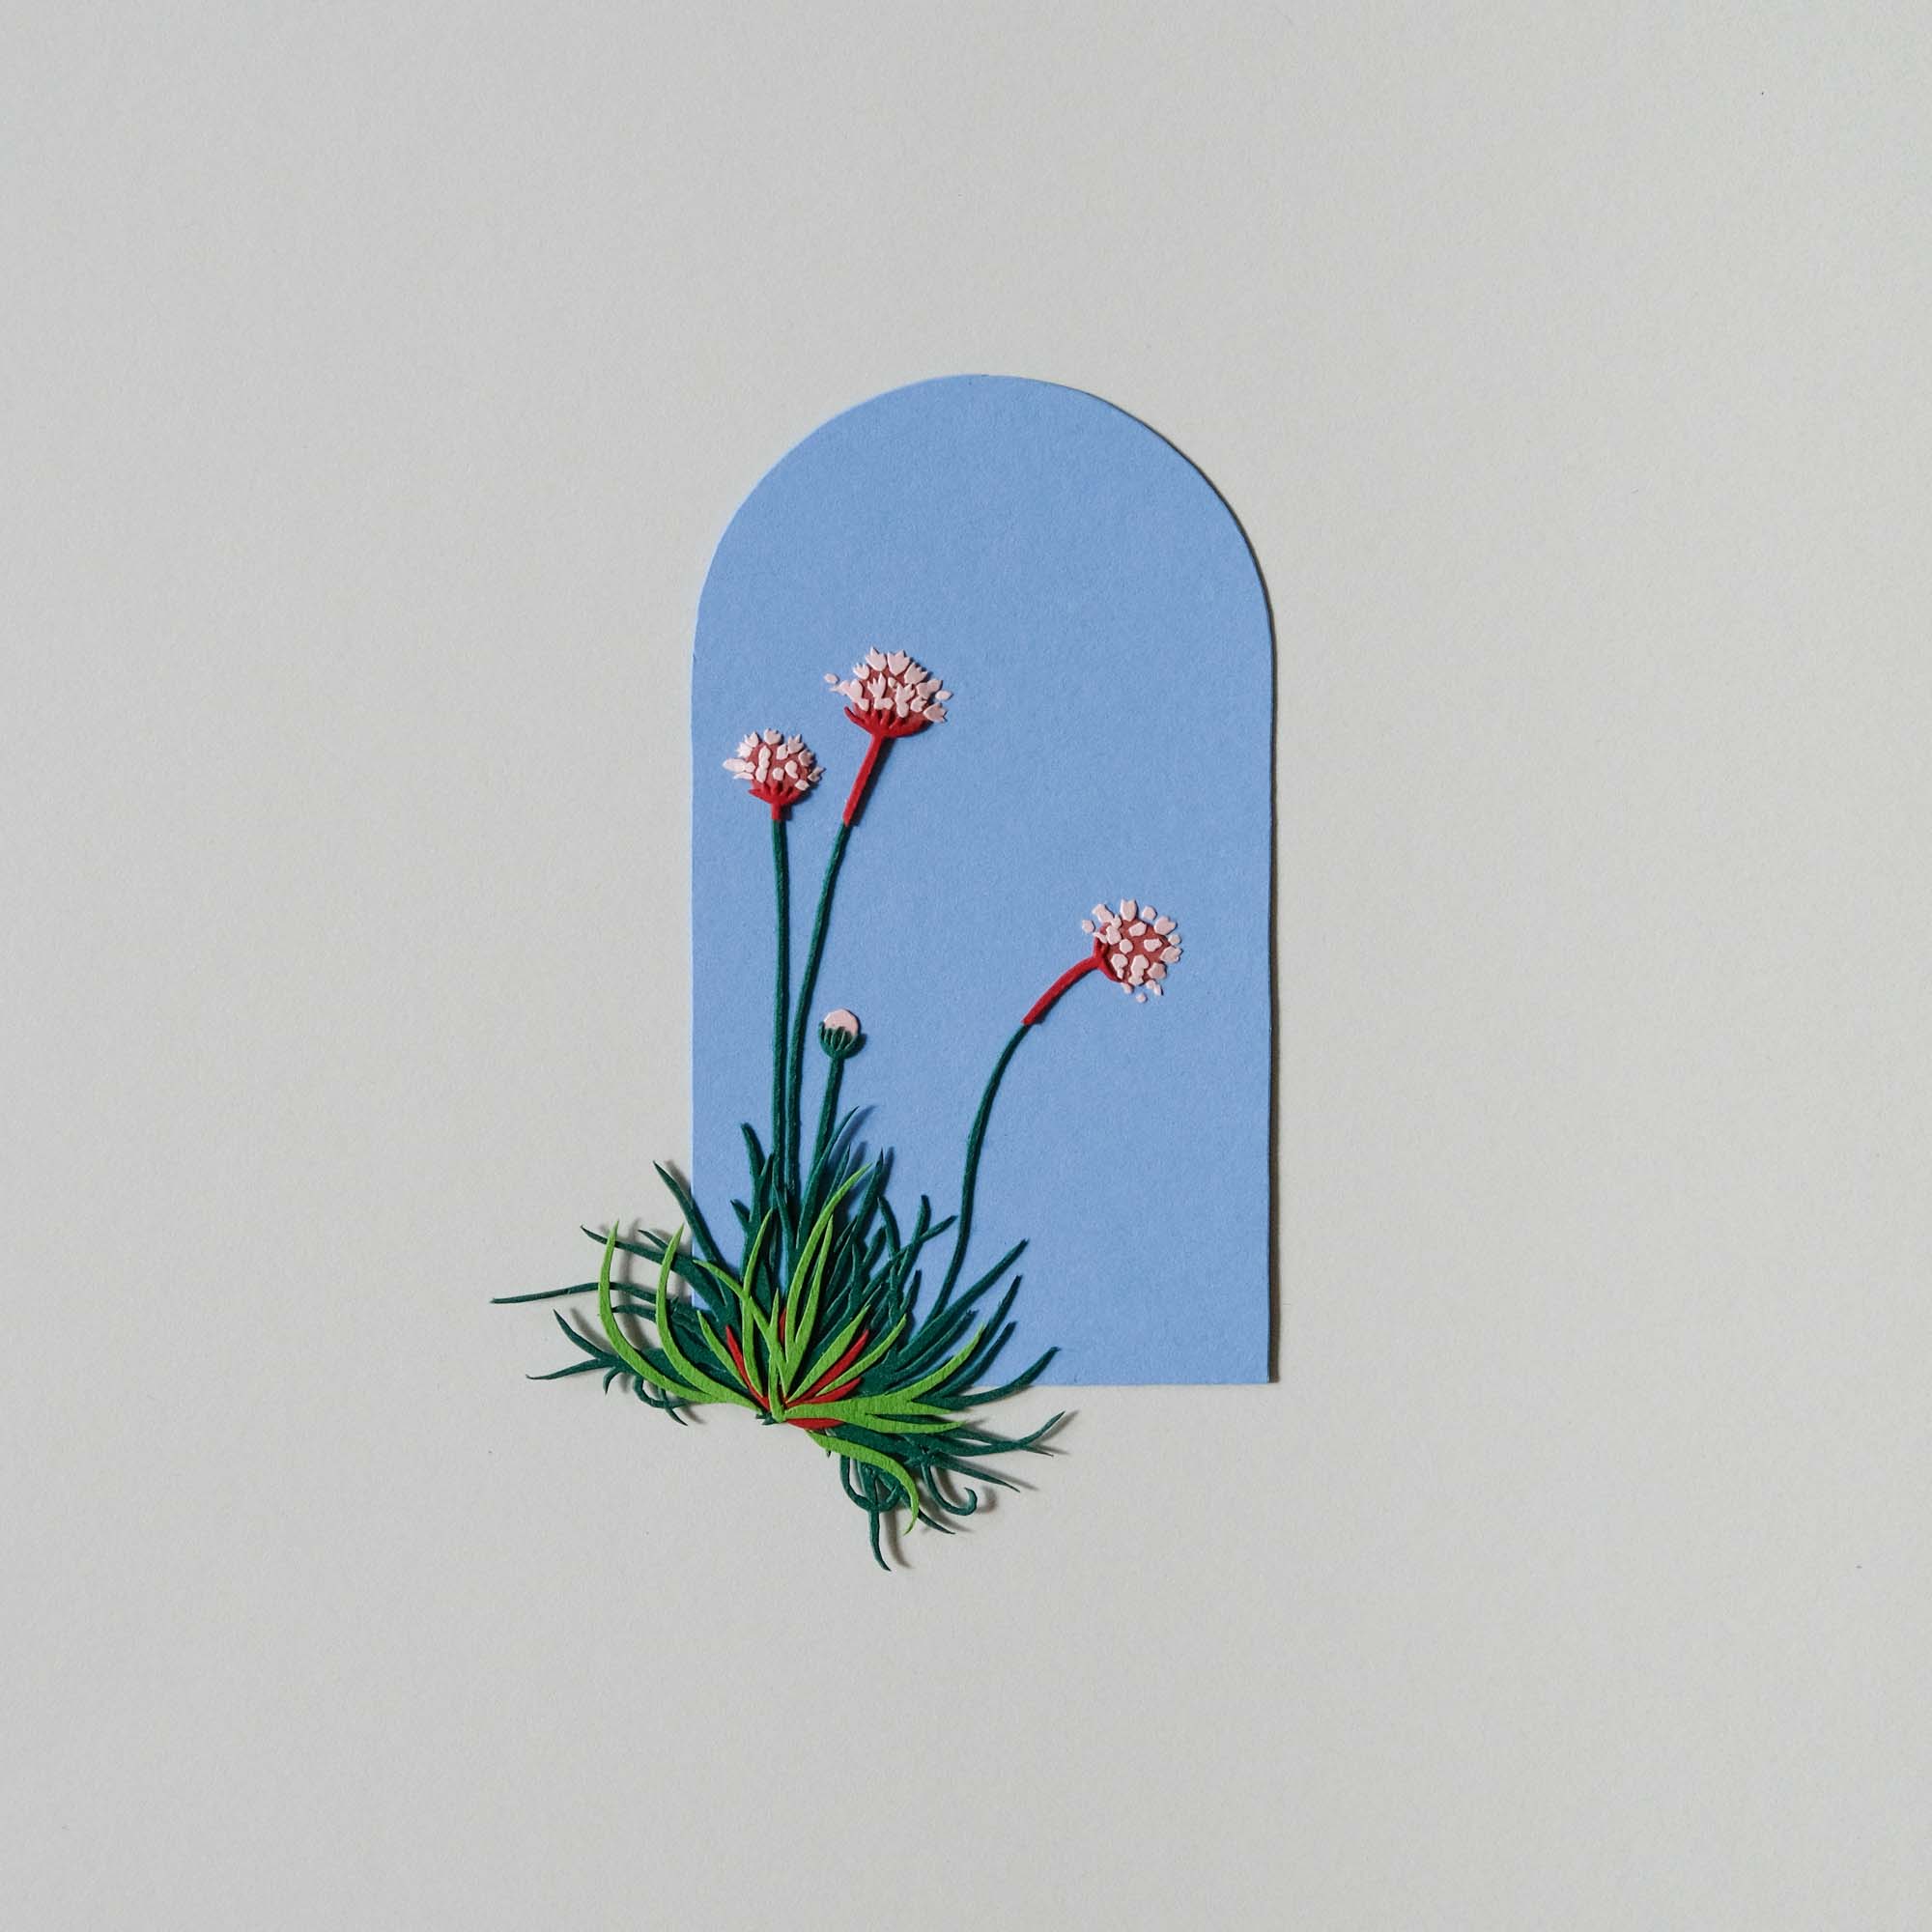 A paper sea thrift plant with sits on an arched blue background.